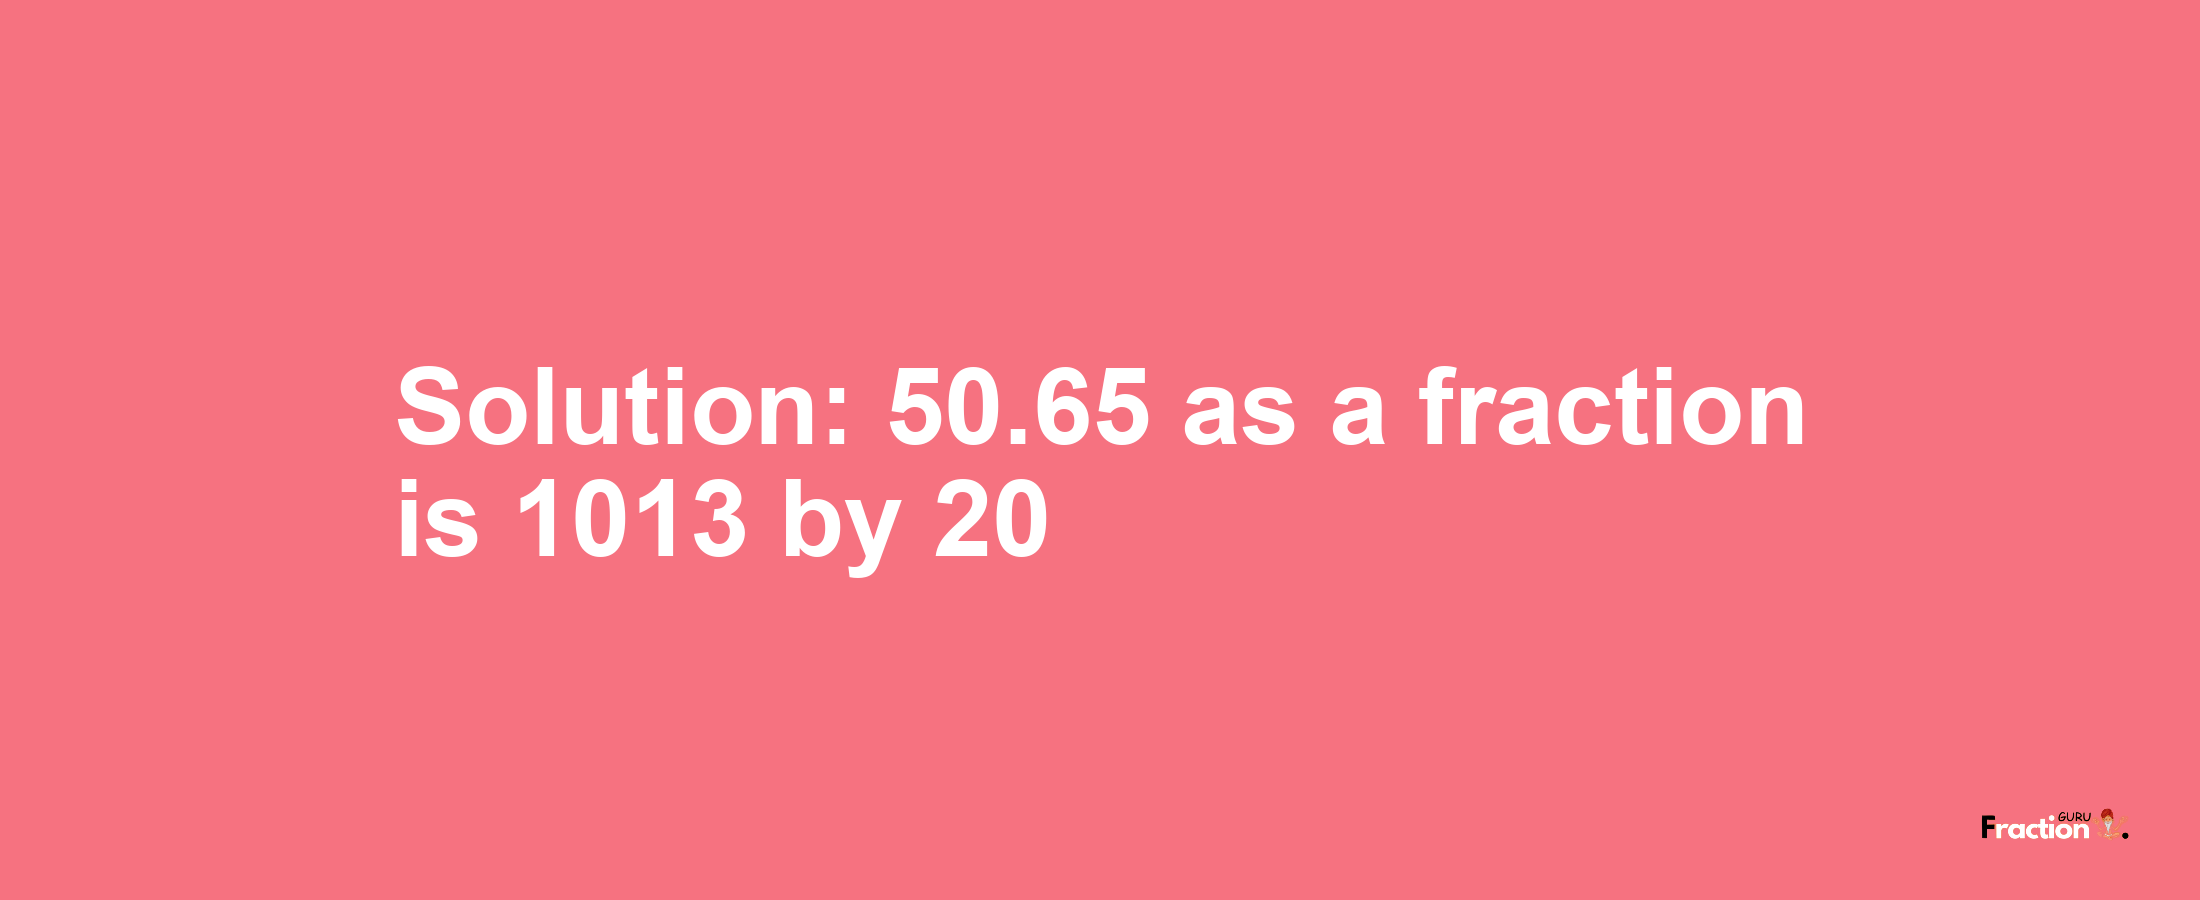 Solution:50.65 as a fraction is 1013/20